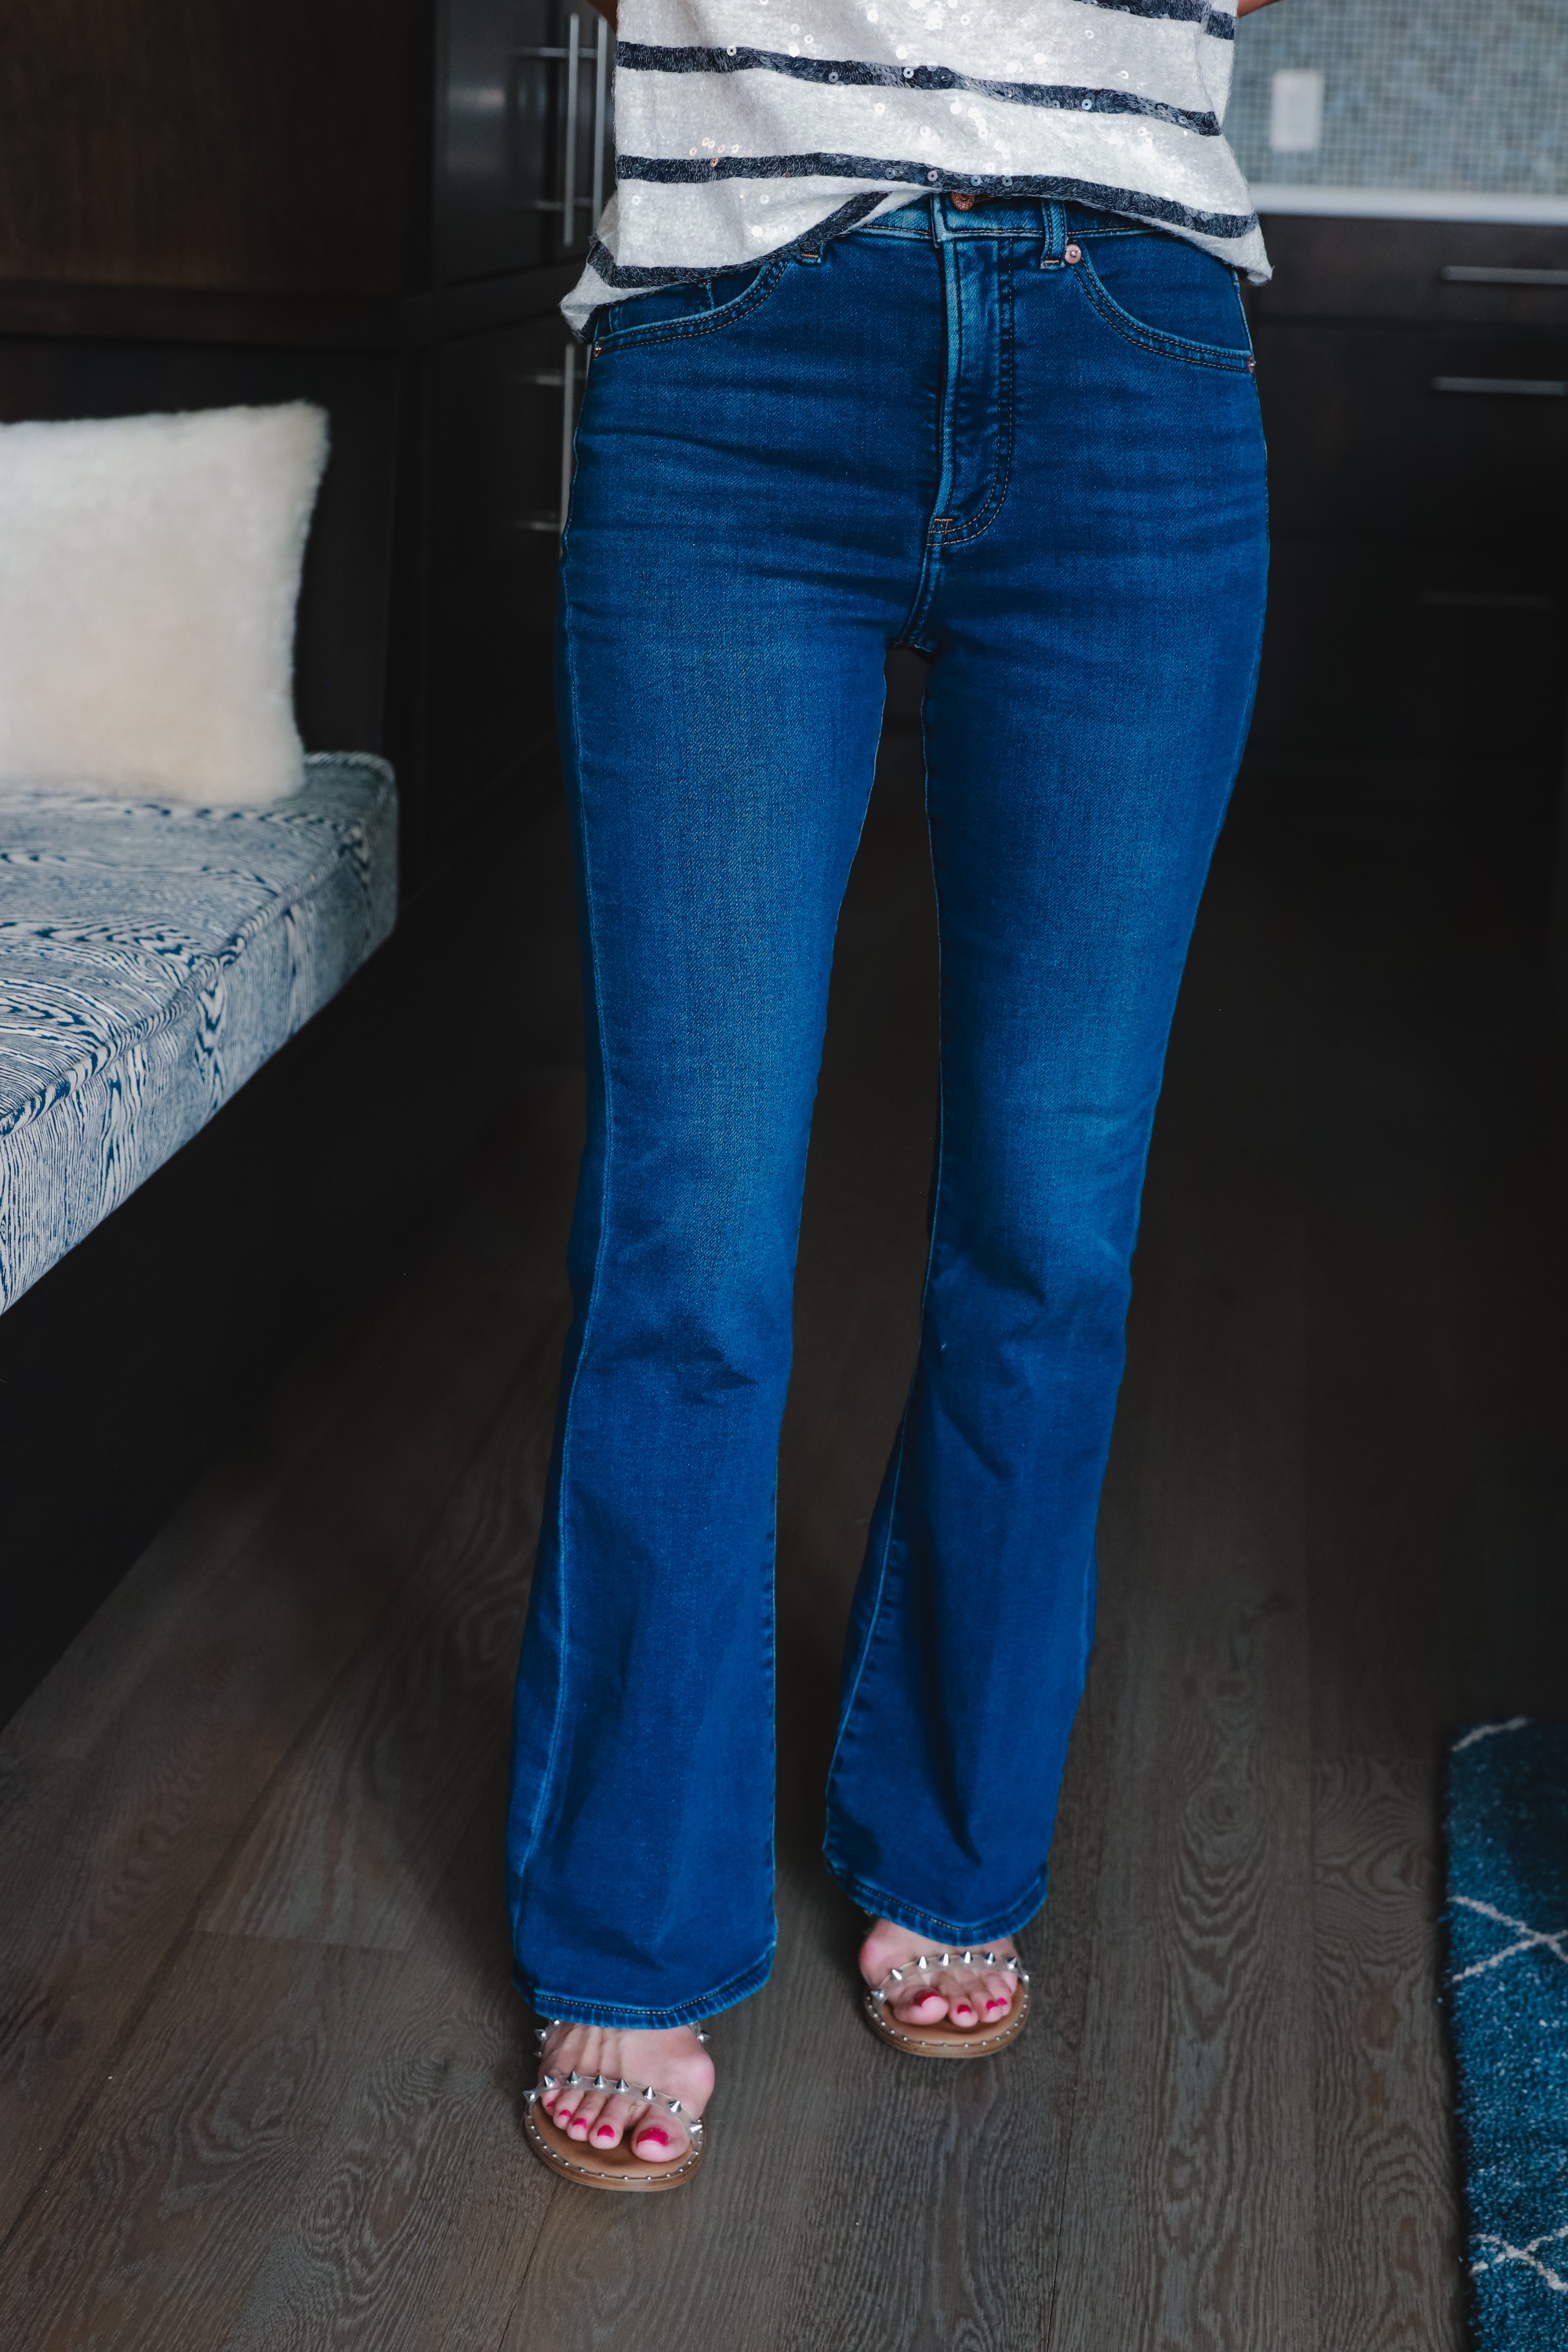 Express Denim, Fashion blogger Erin Busbee of Busbee Style wearing Luxe Comfort knit dark wash flare jeans and striped sequin shirt from Express with Steve Madden clear studded sandals in Telluride, Colorado